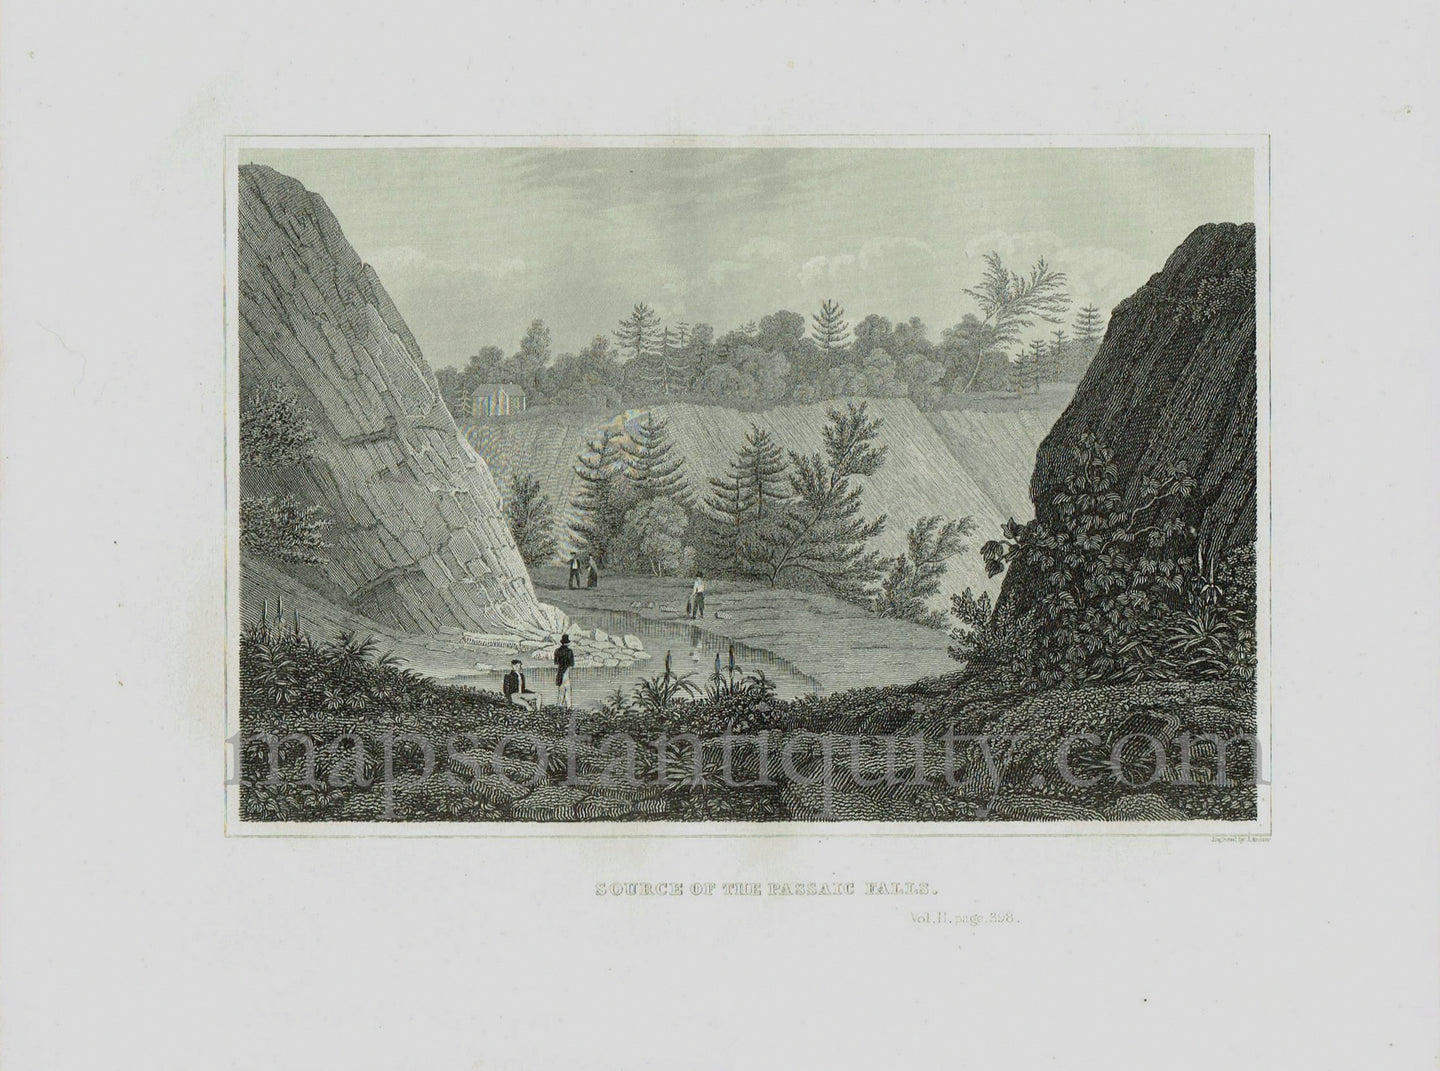 Antique-Print-Prints-Illustration-Source-of-the-Passaic-Falls-Great-River-New-Jersey-Walker-1843-1840s-1800s-Early-Mid-19th-Century-Maps-of-Antiquity